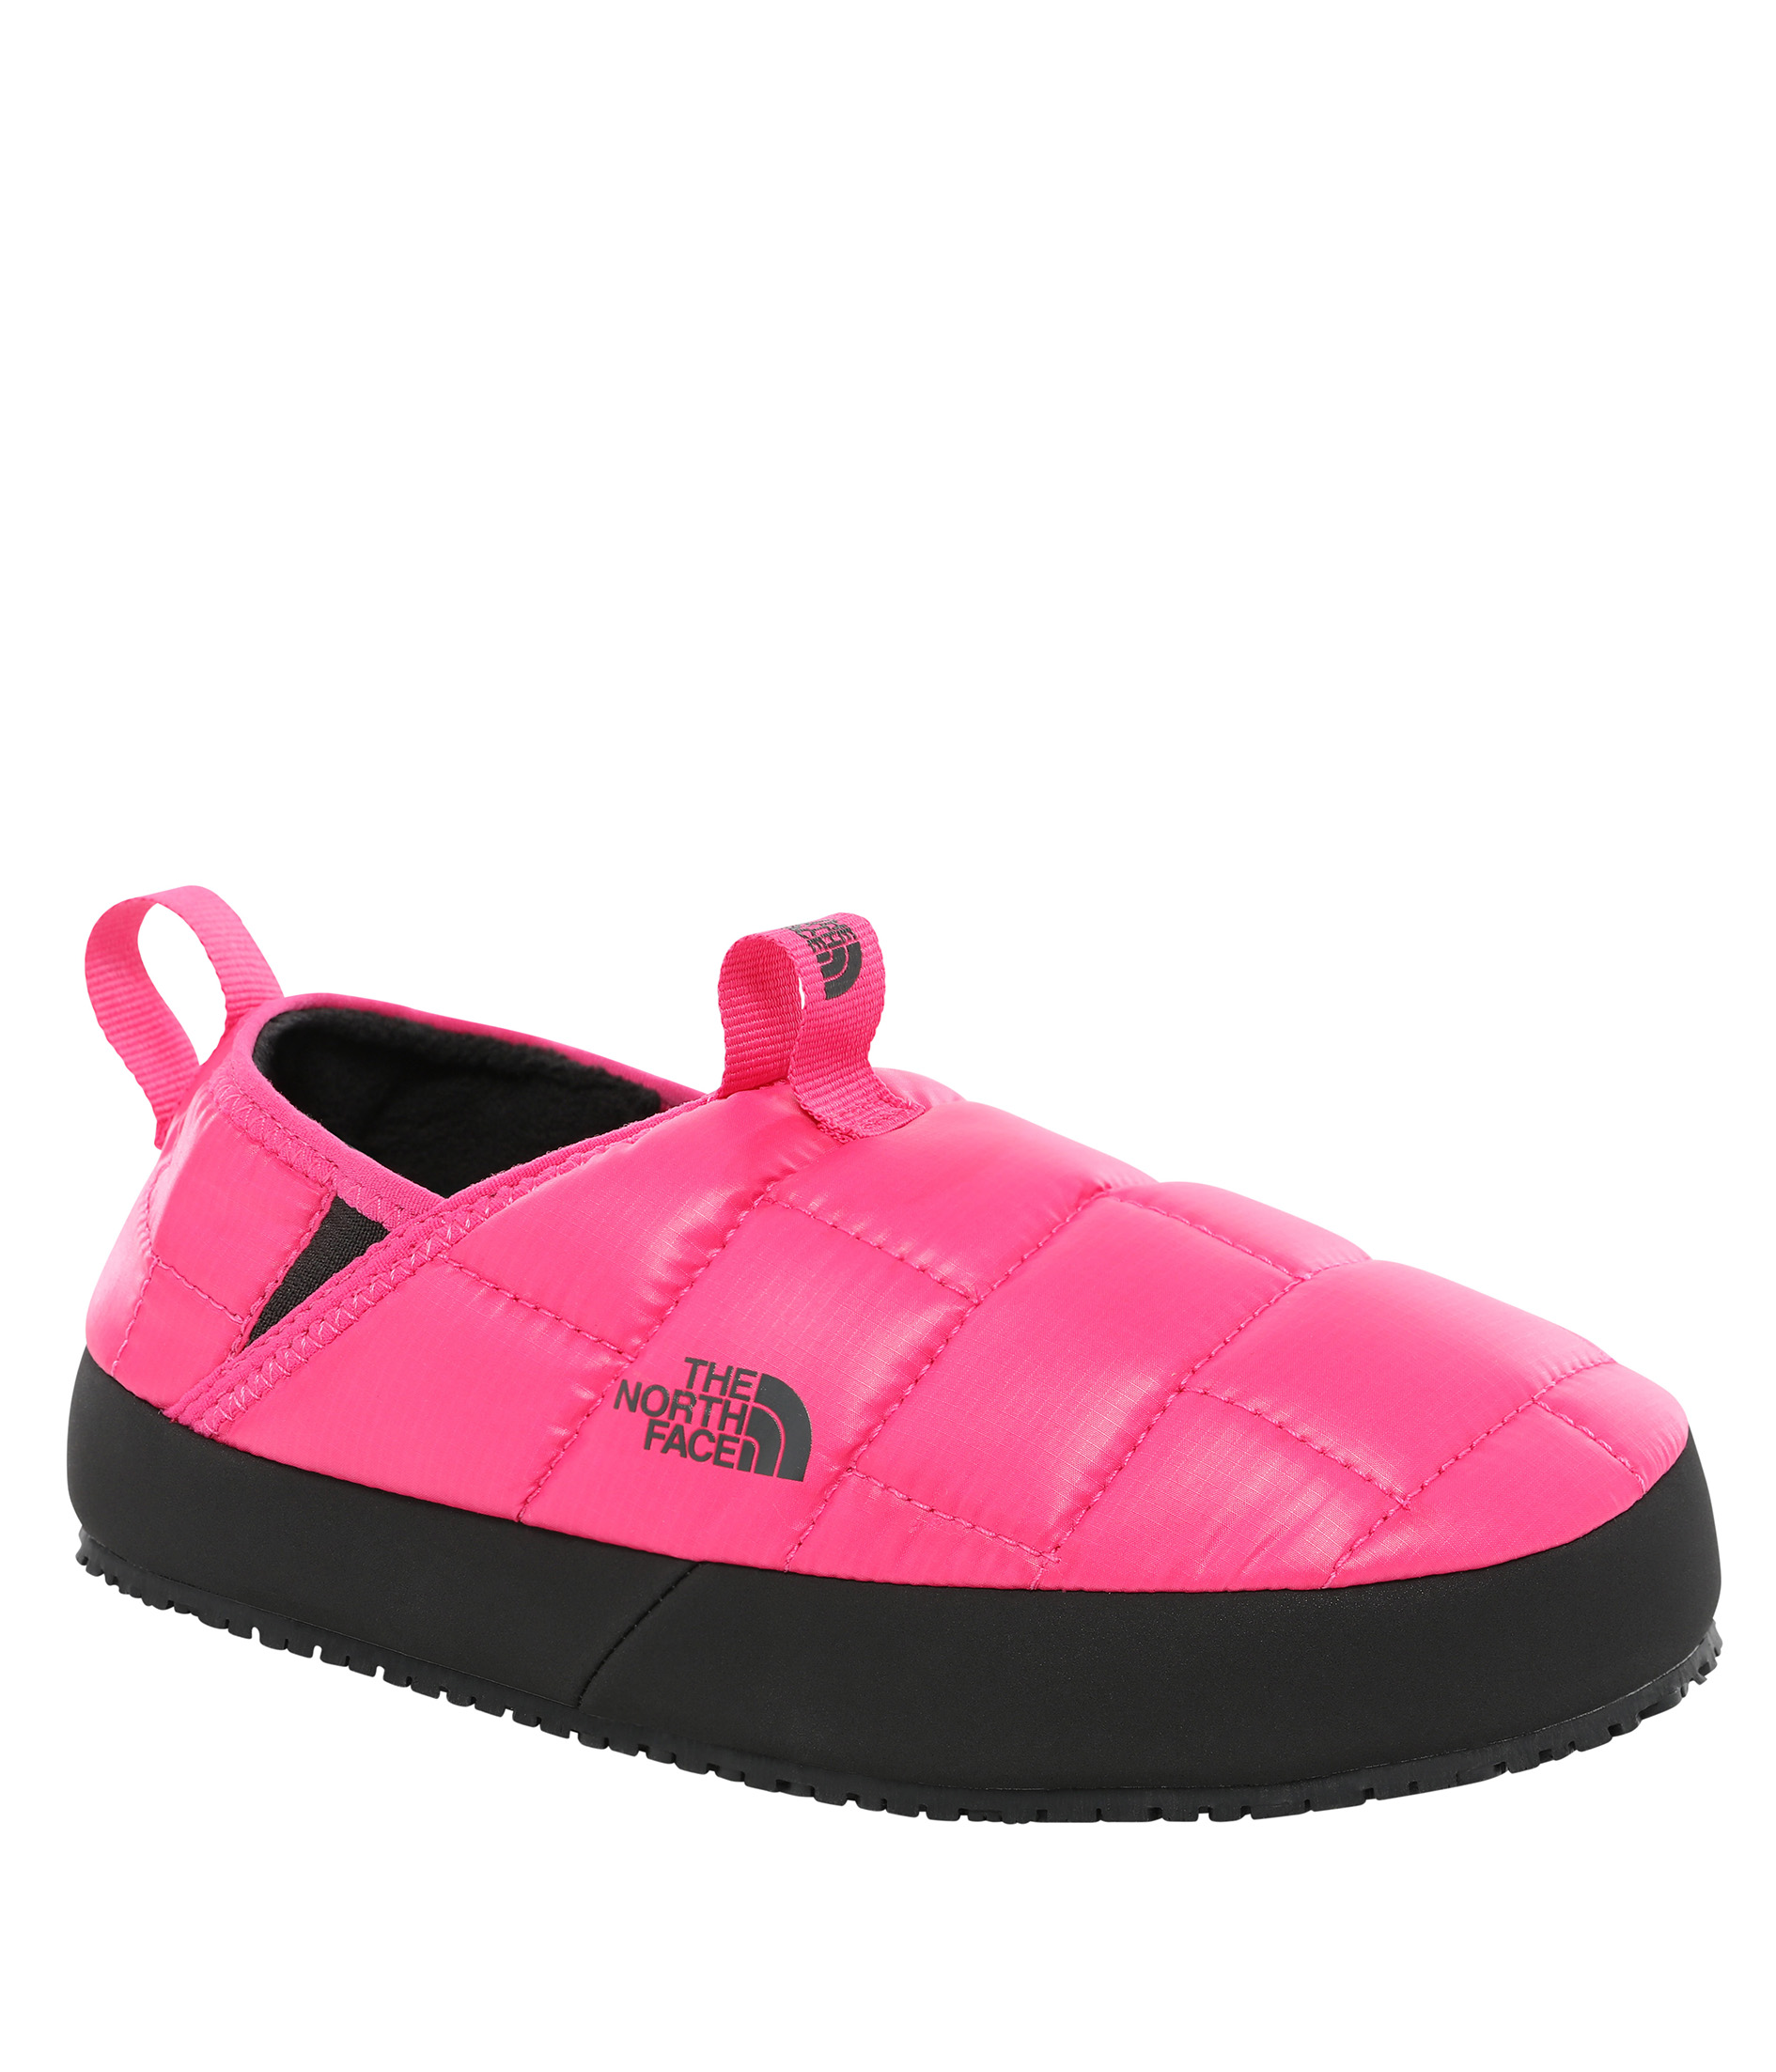 Y THERMOBALL TRACTION MULE II EV8 - MR. PINK/TNF BLACK